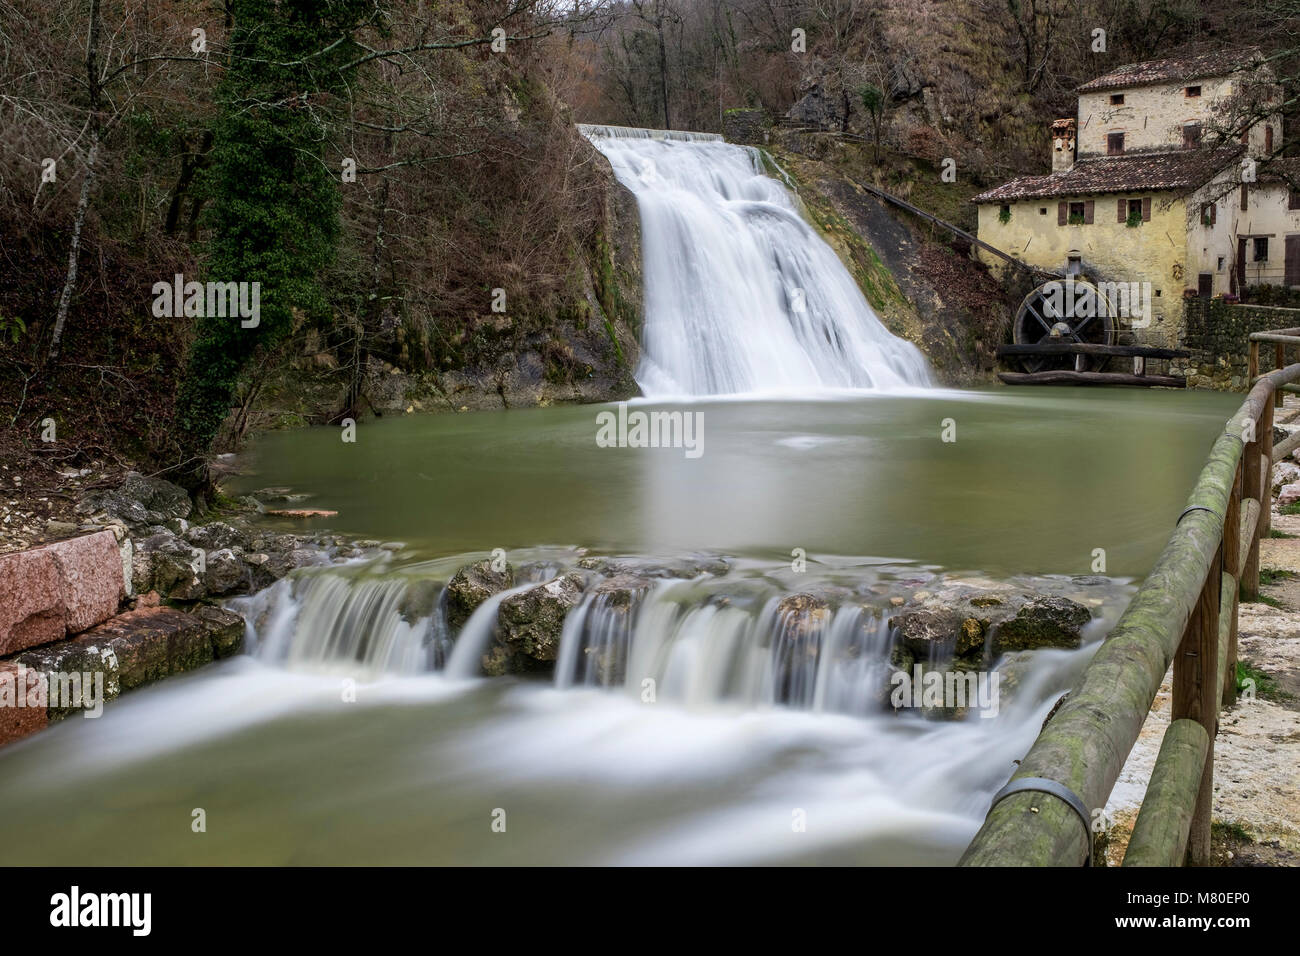 Refrontolo, ITALY. 15 March, 2018. Long exposure in Refrontolo in the province of treviso. Stock Photo